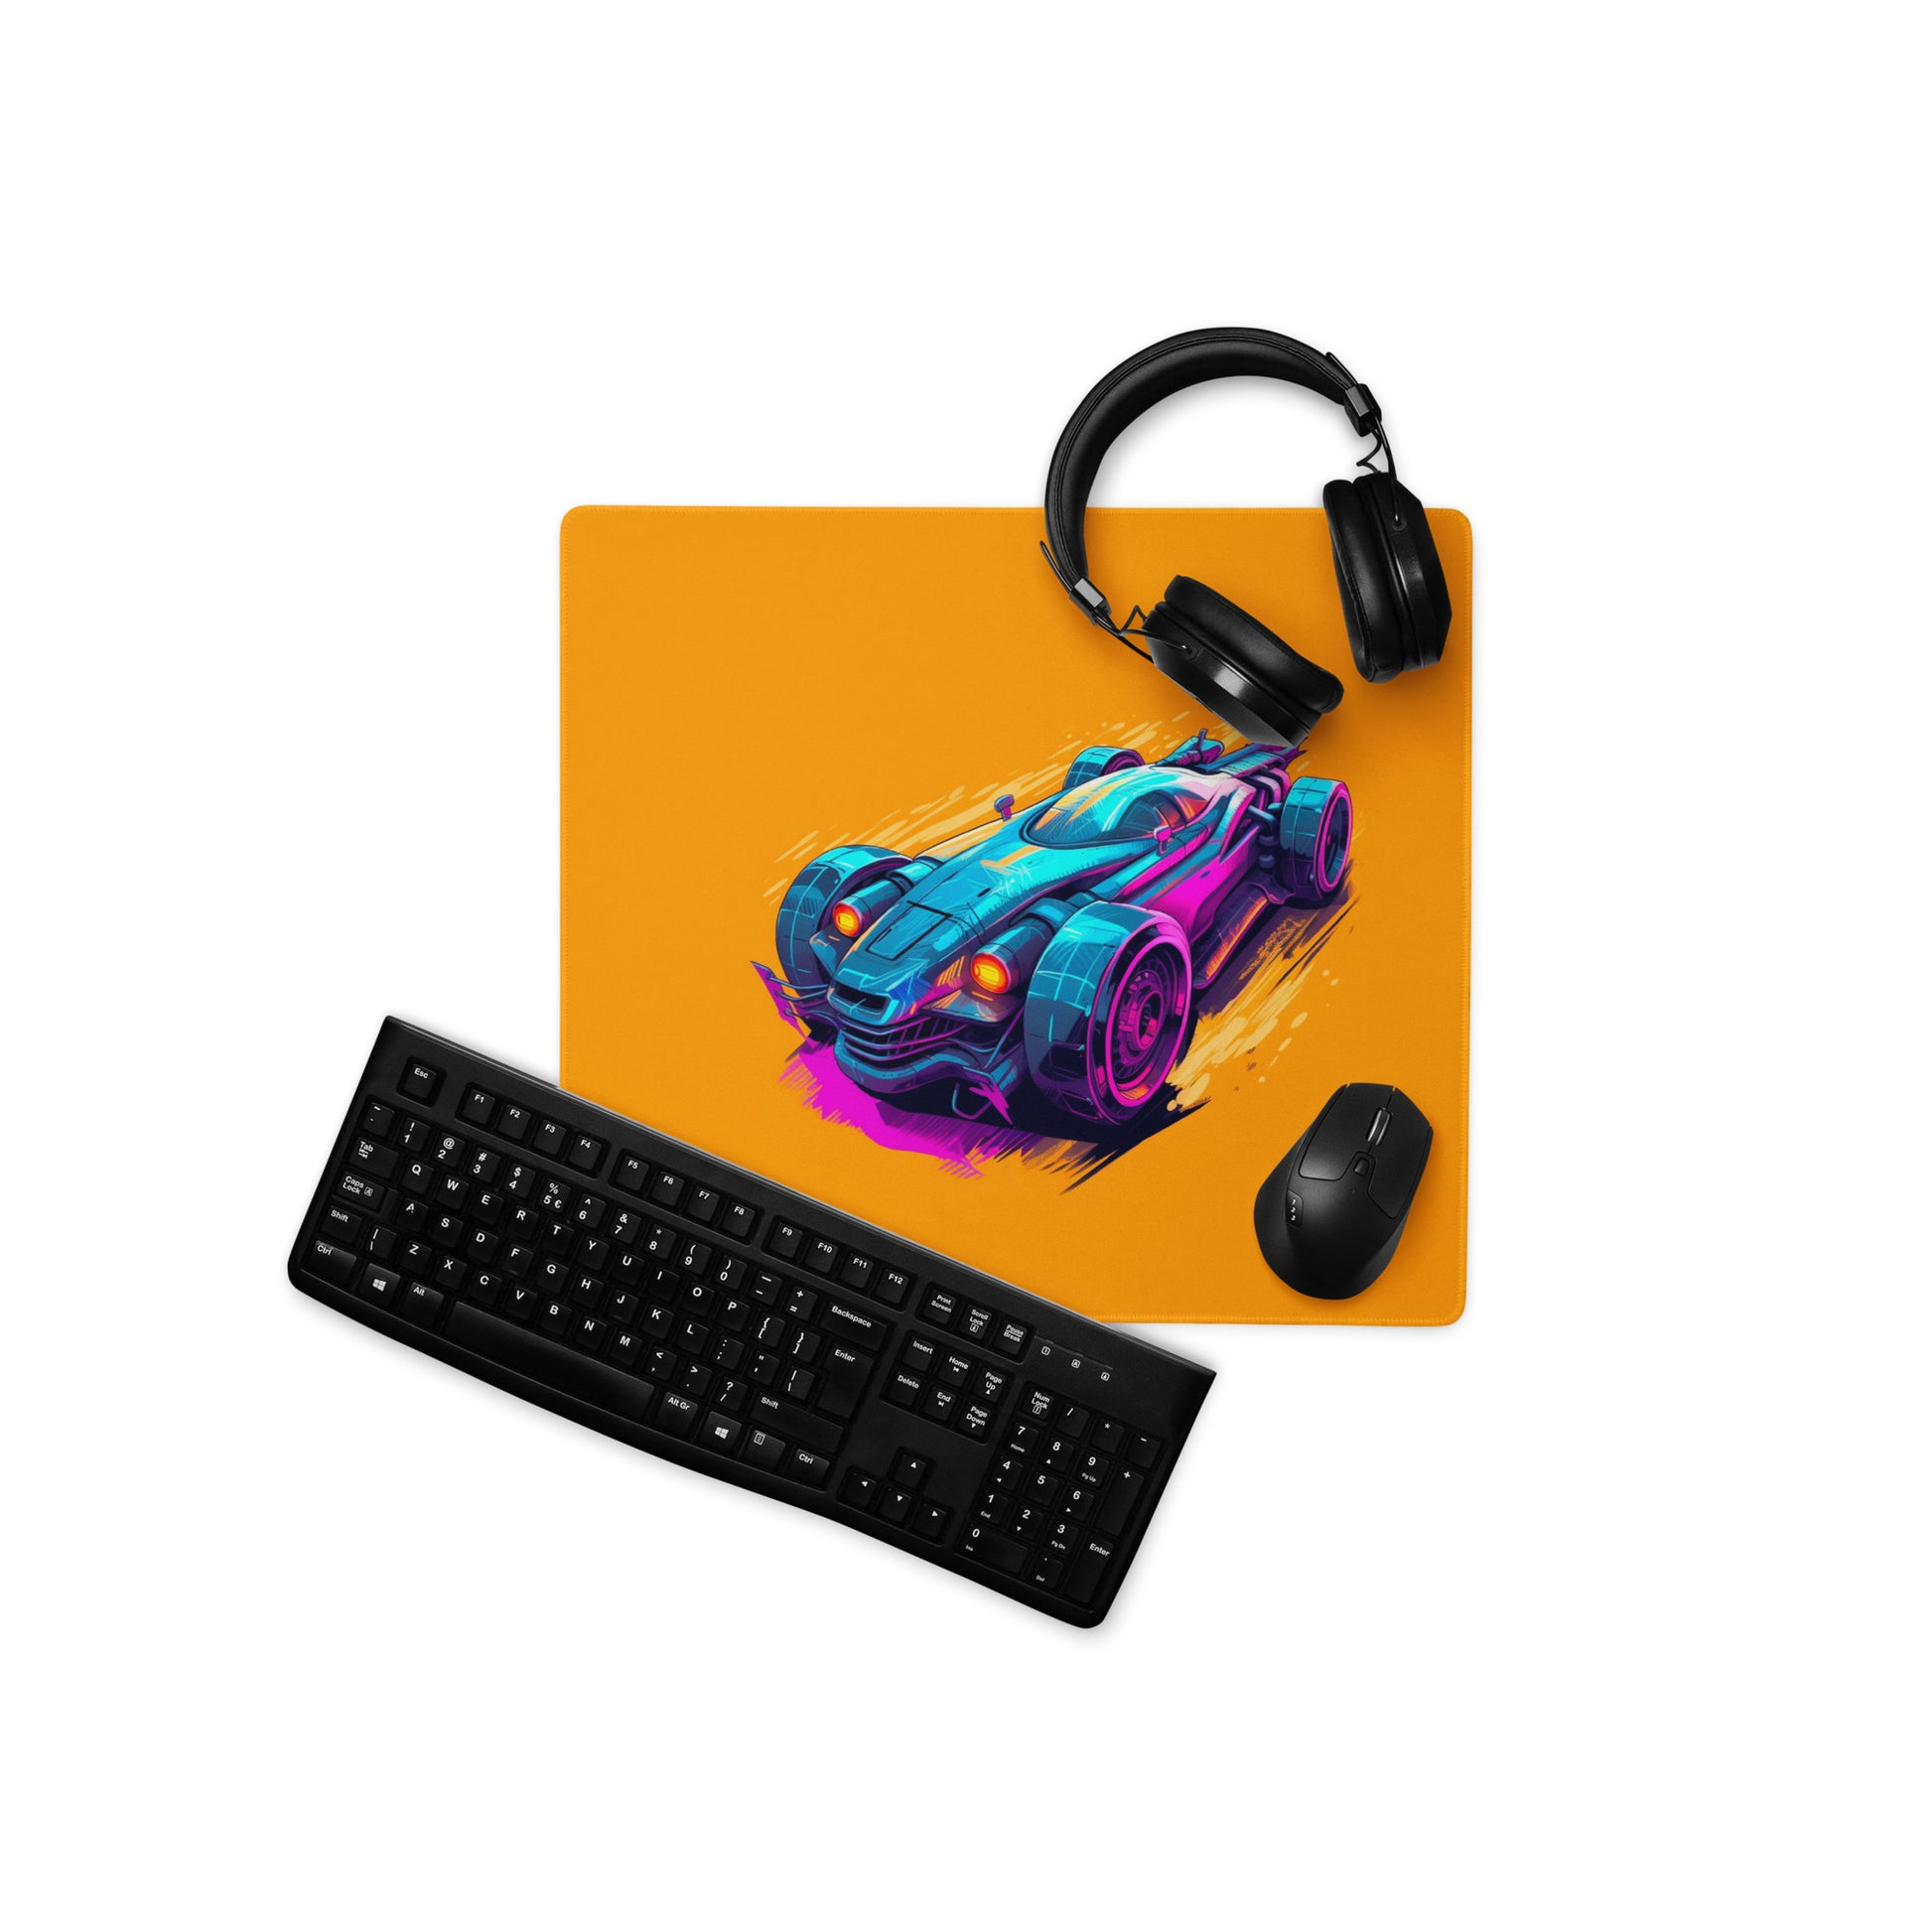 An 18" x 16" mouse pad with a futuristic race car displayed with headphones, a keyboard and a mouse on it. Orange in color.